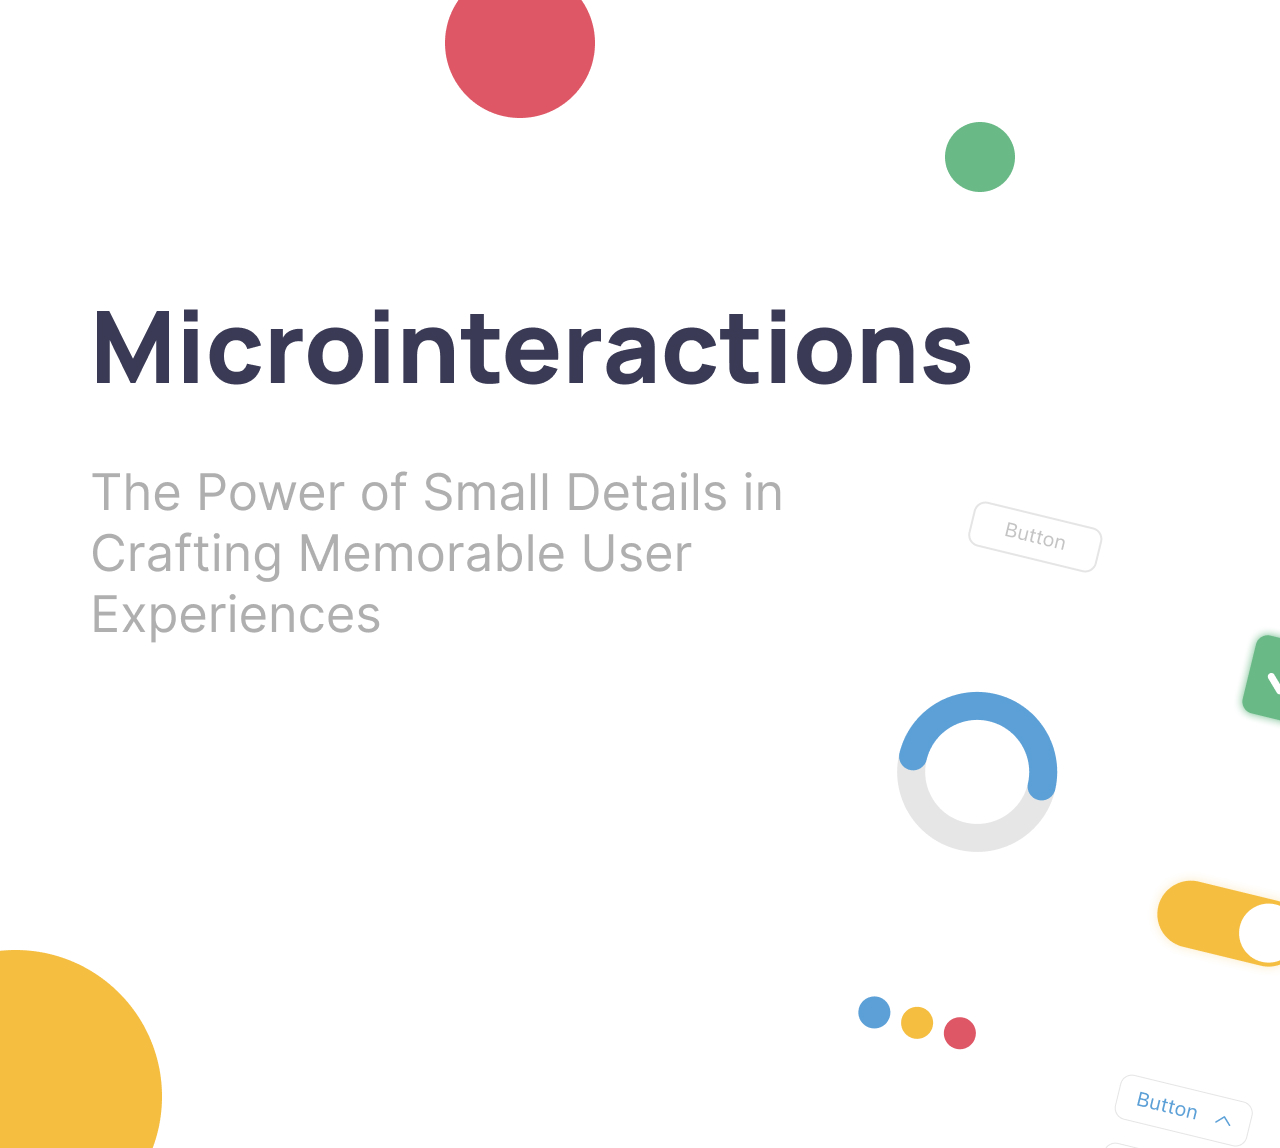 Microinteractions: The Power of Small Details
                                        in Crafting Memorable User Experiences